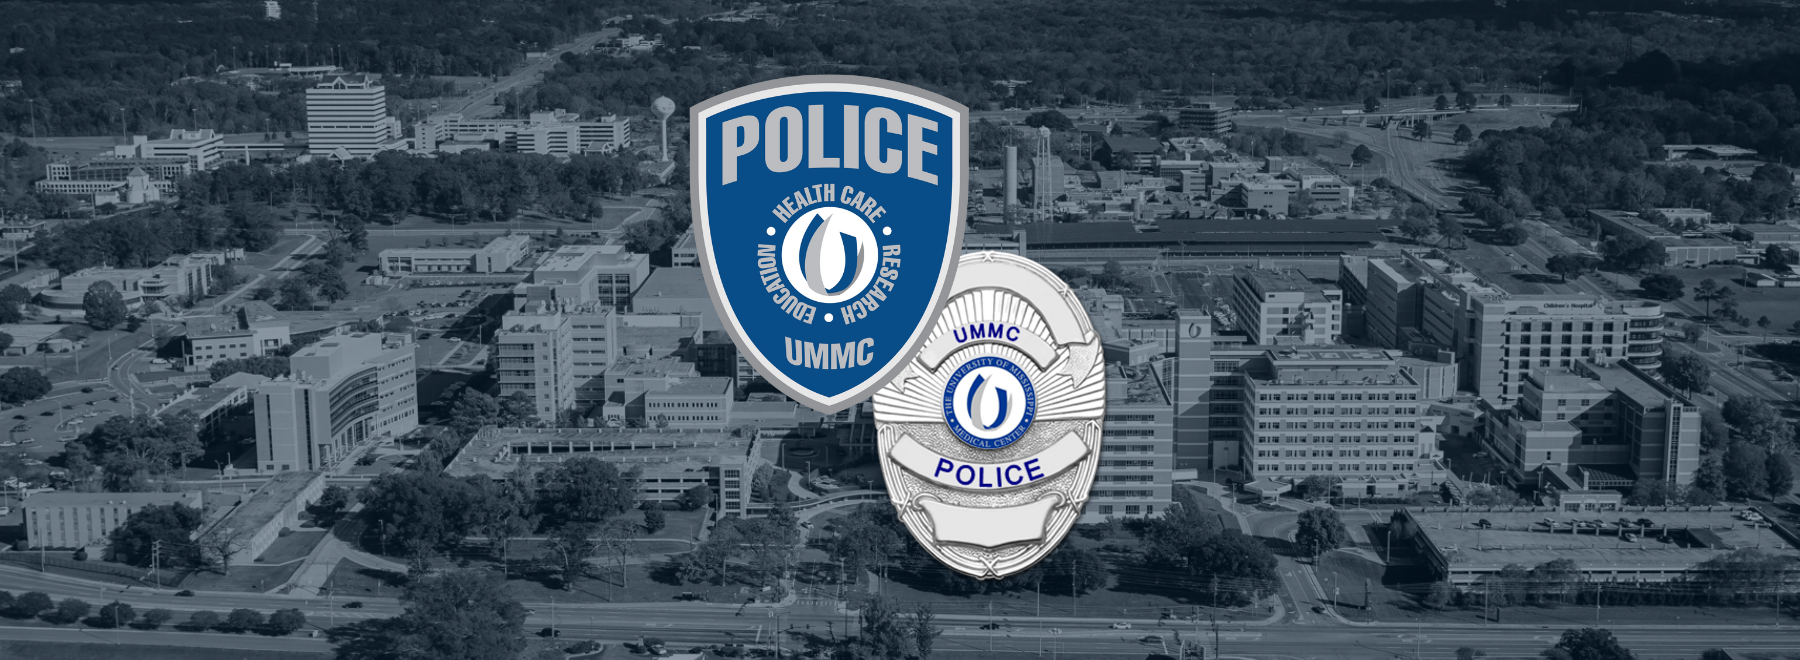 UMMC Police logo and badges over image of campus